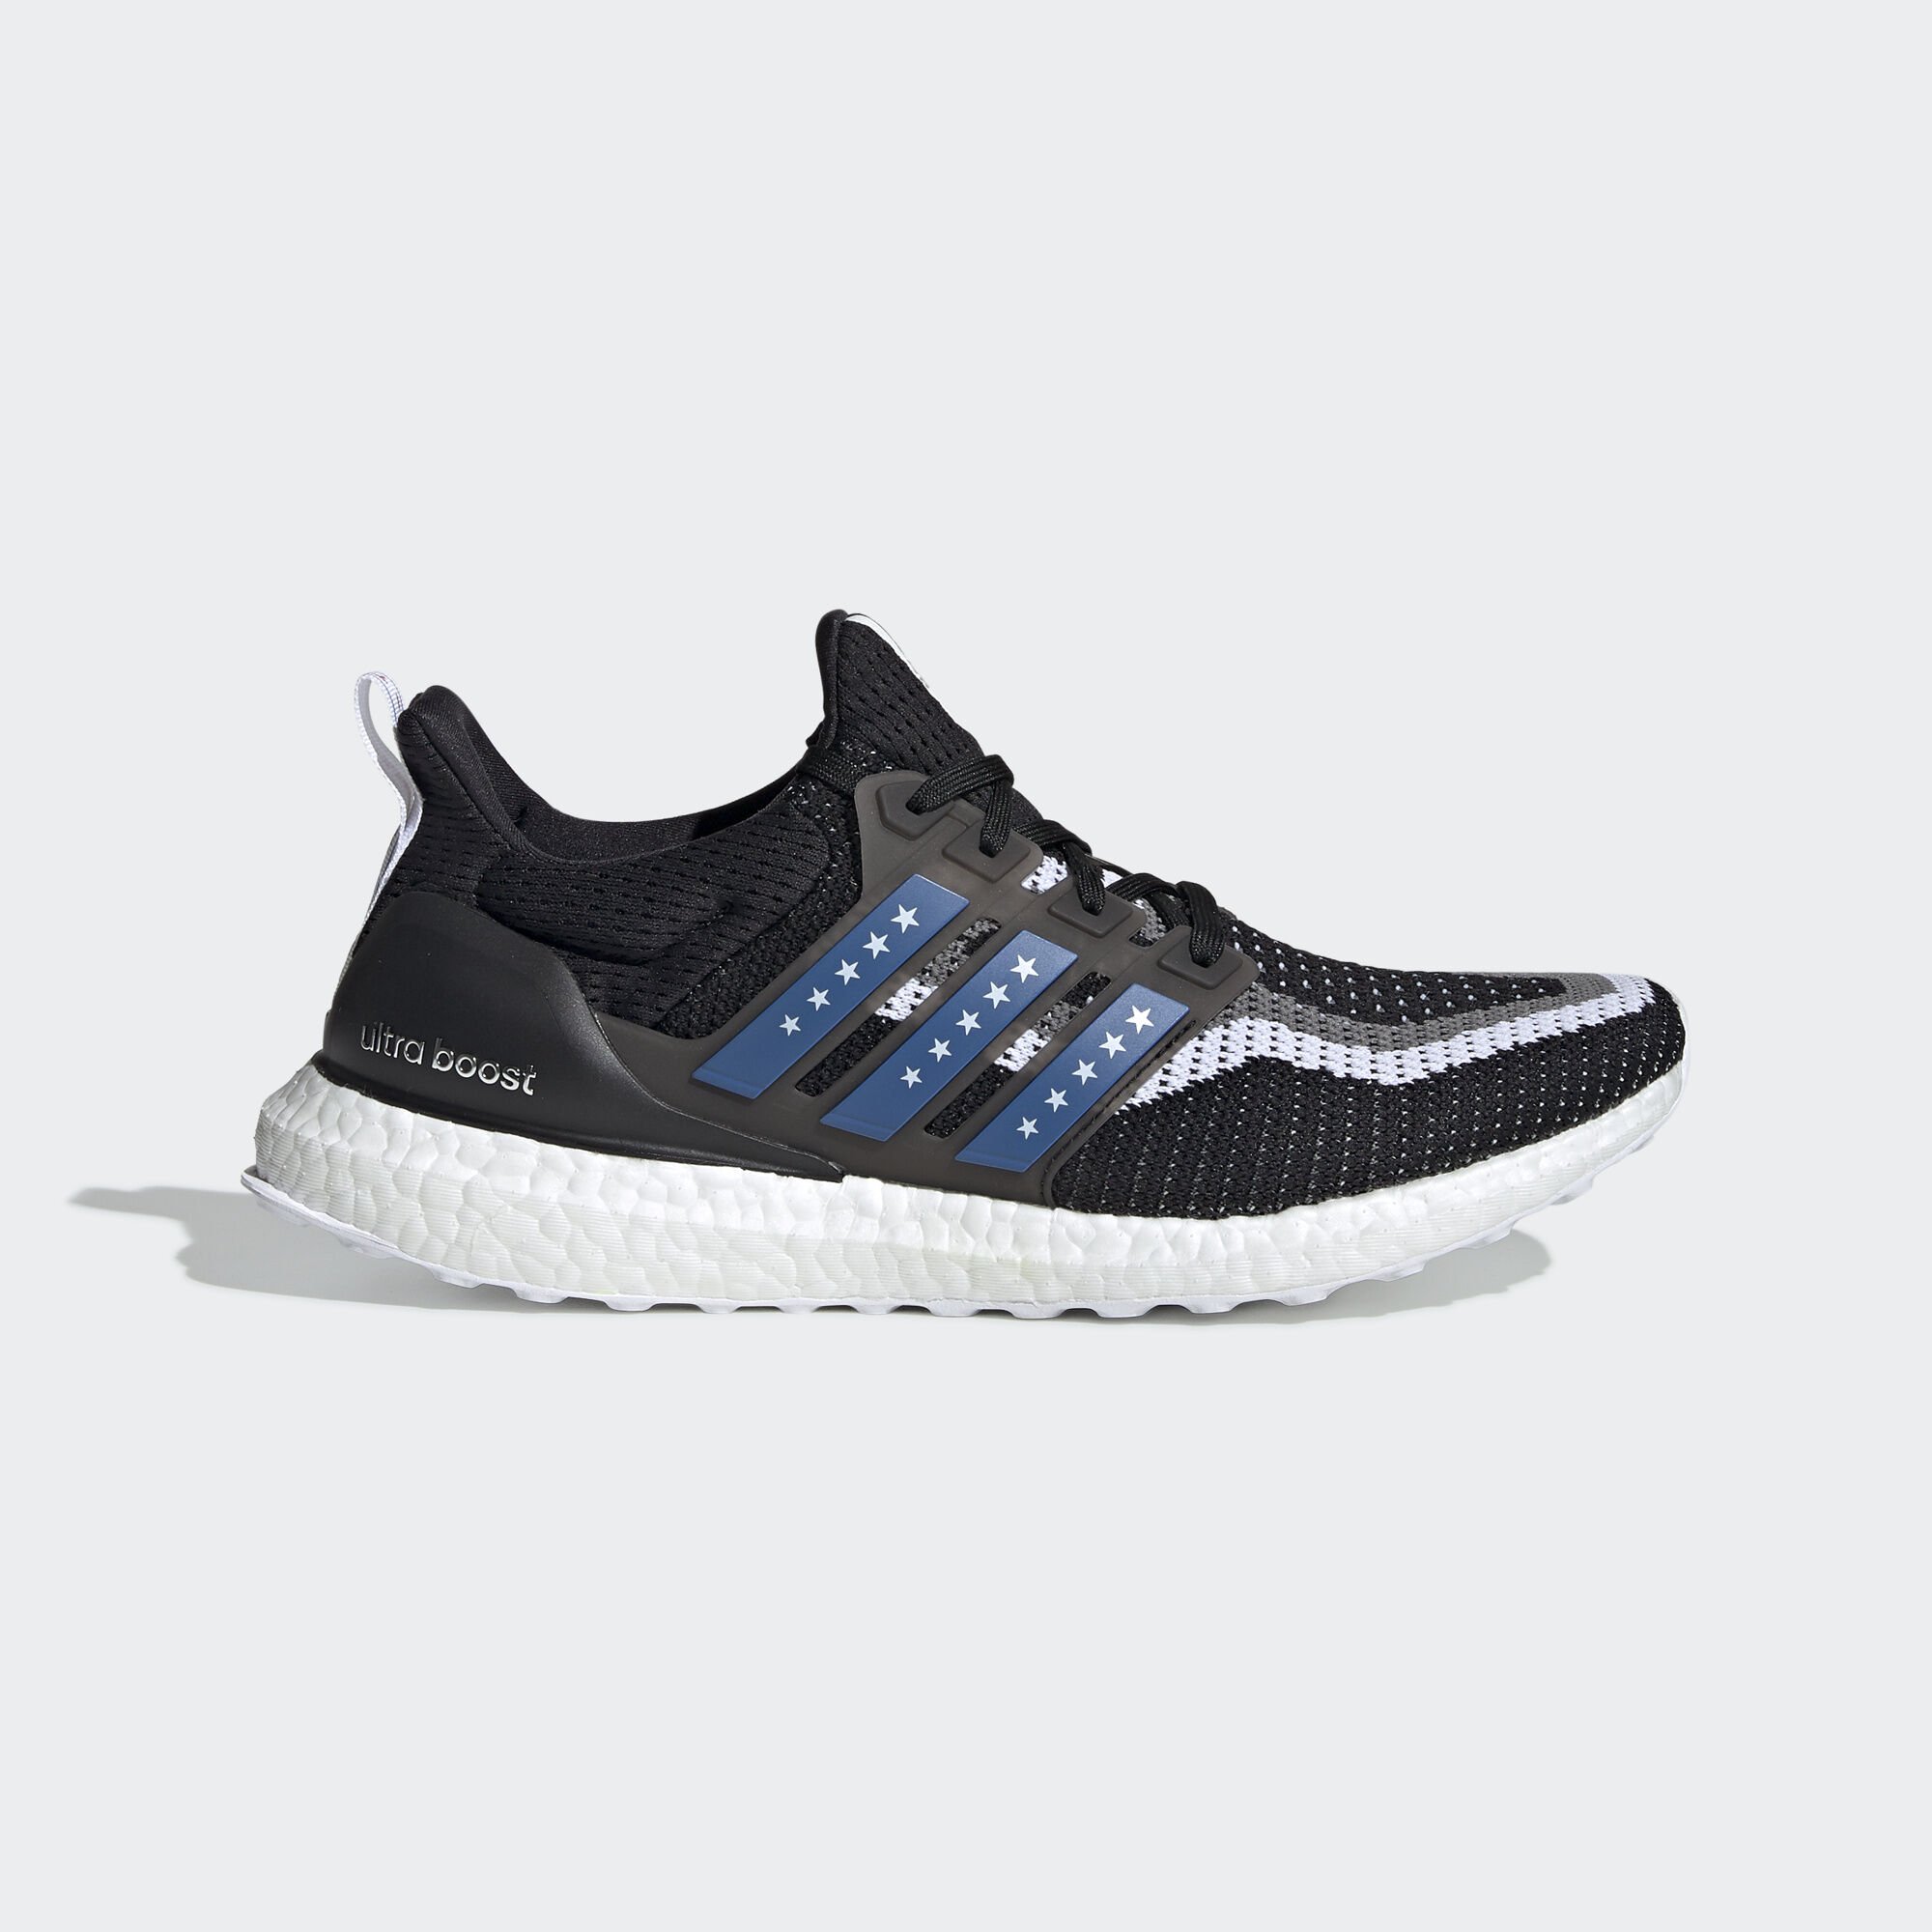 adidas alerts on Twitter: "Under retail on #adidas US. adidas Ultra Boost  2.0 USA. Retail $180. Now $153 shipped. Sign up for newsletter for 15% off.  Ultra Boost https://t.co/kll17vgkrT Newsletter https://t.co/VNVzFUK2p7 #ad